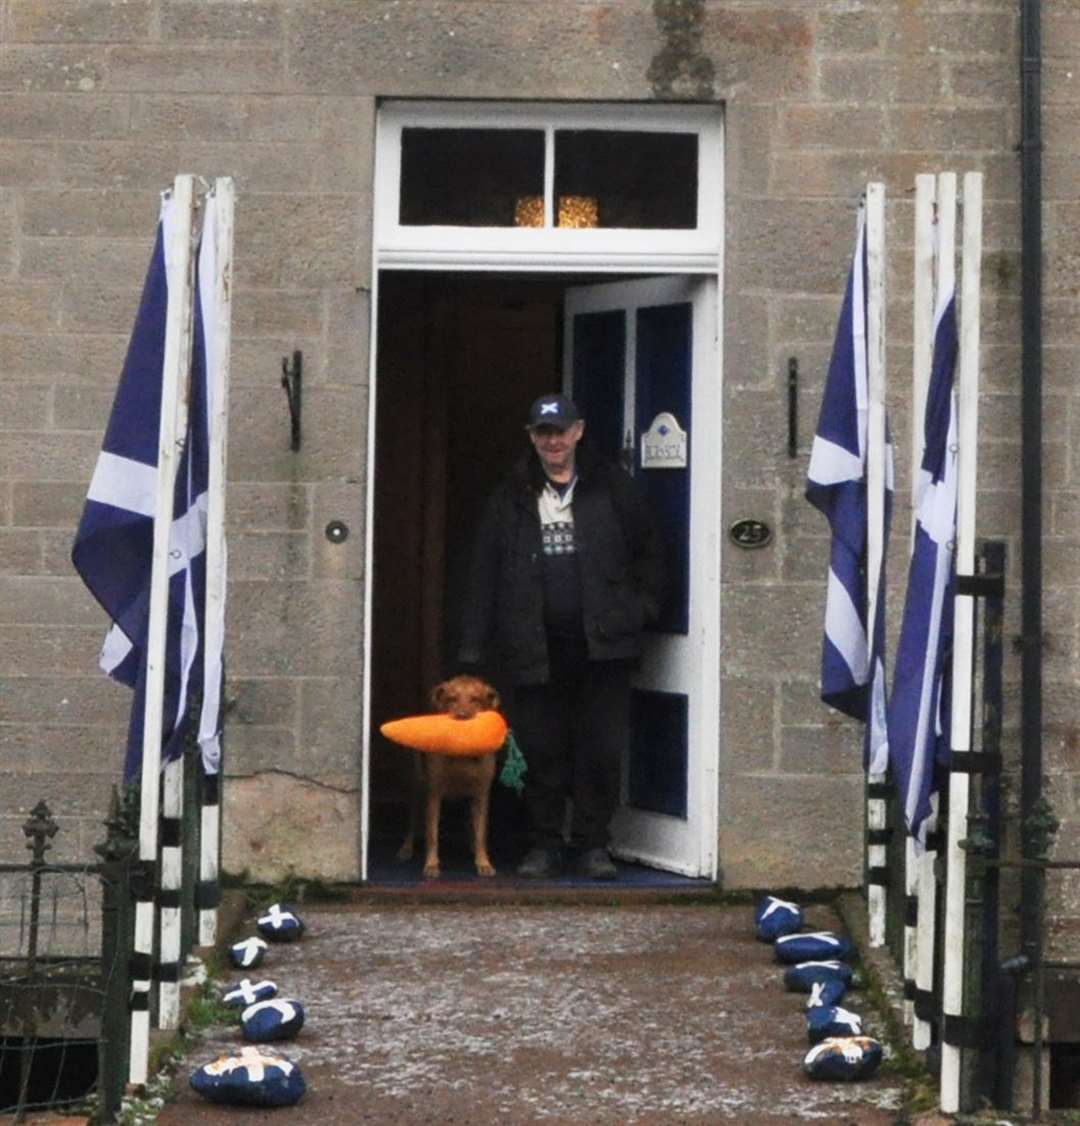 Allan was affectionately known as The Flag Man by passers-by thanks to the patriotic disopaly outside his front door.